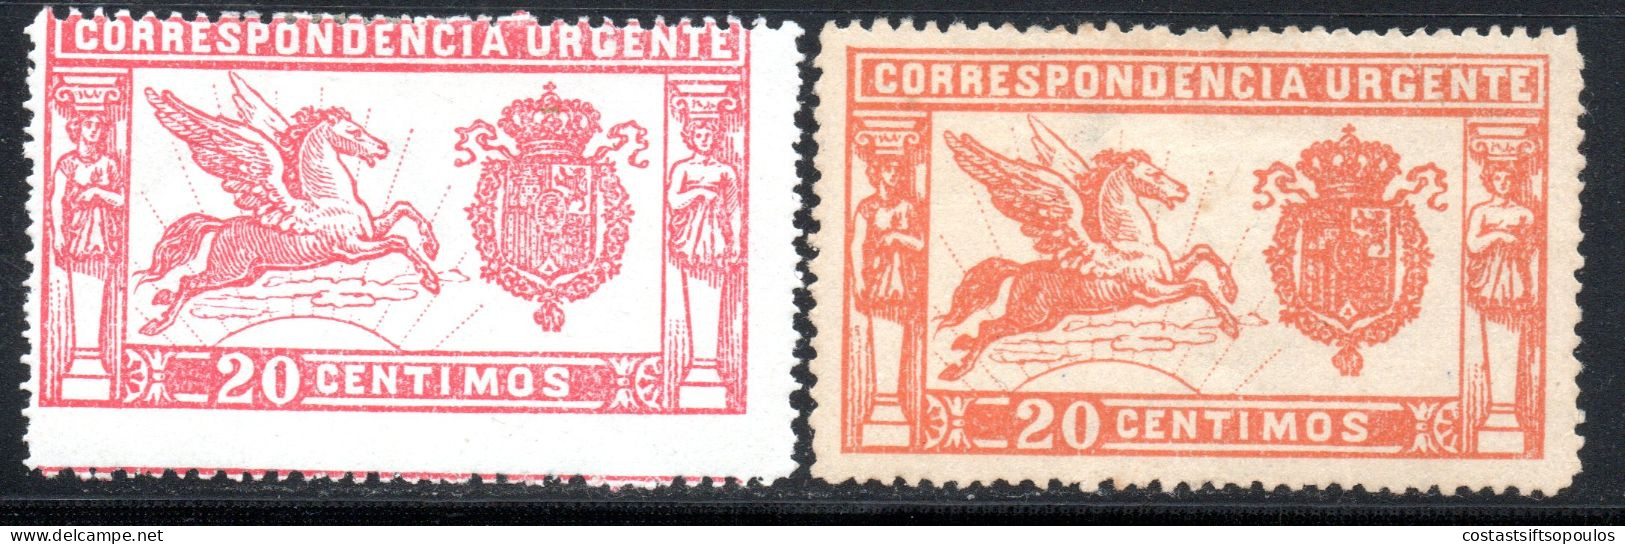 2155. SPAIN 1905-1925 SPECIAL DELIVERY #1 PEGASUS X 2, SHADES, MH. - Exprès